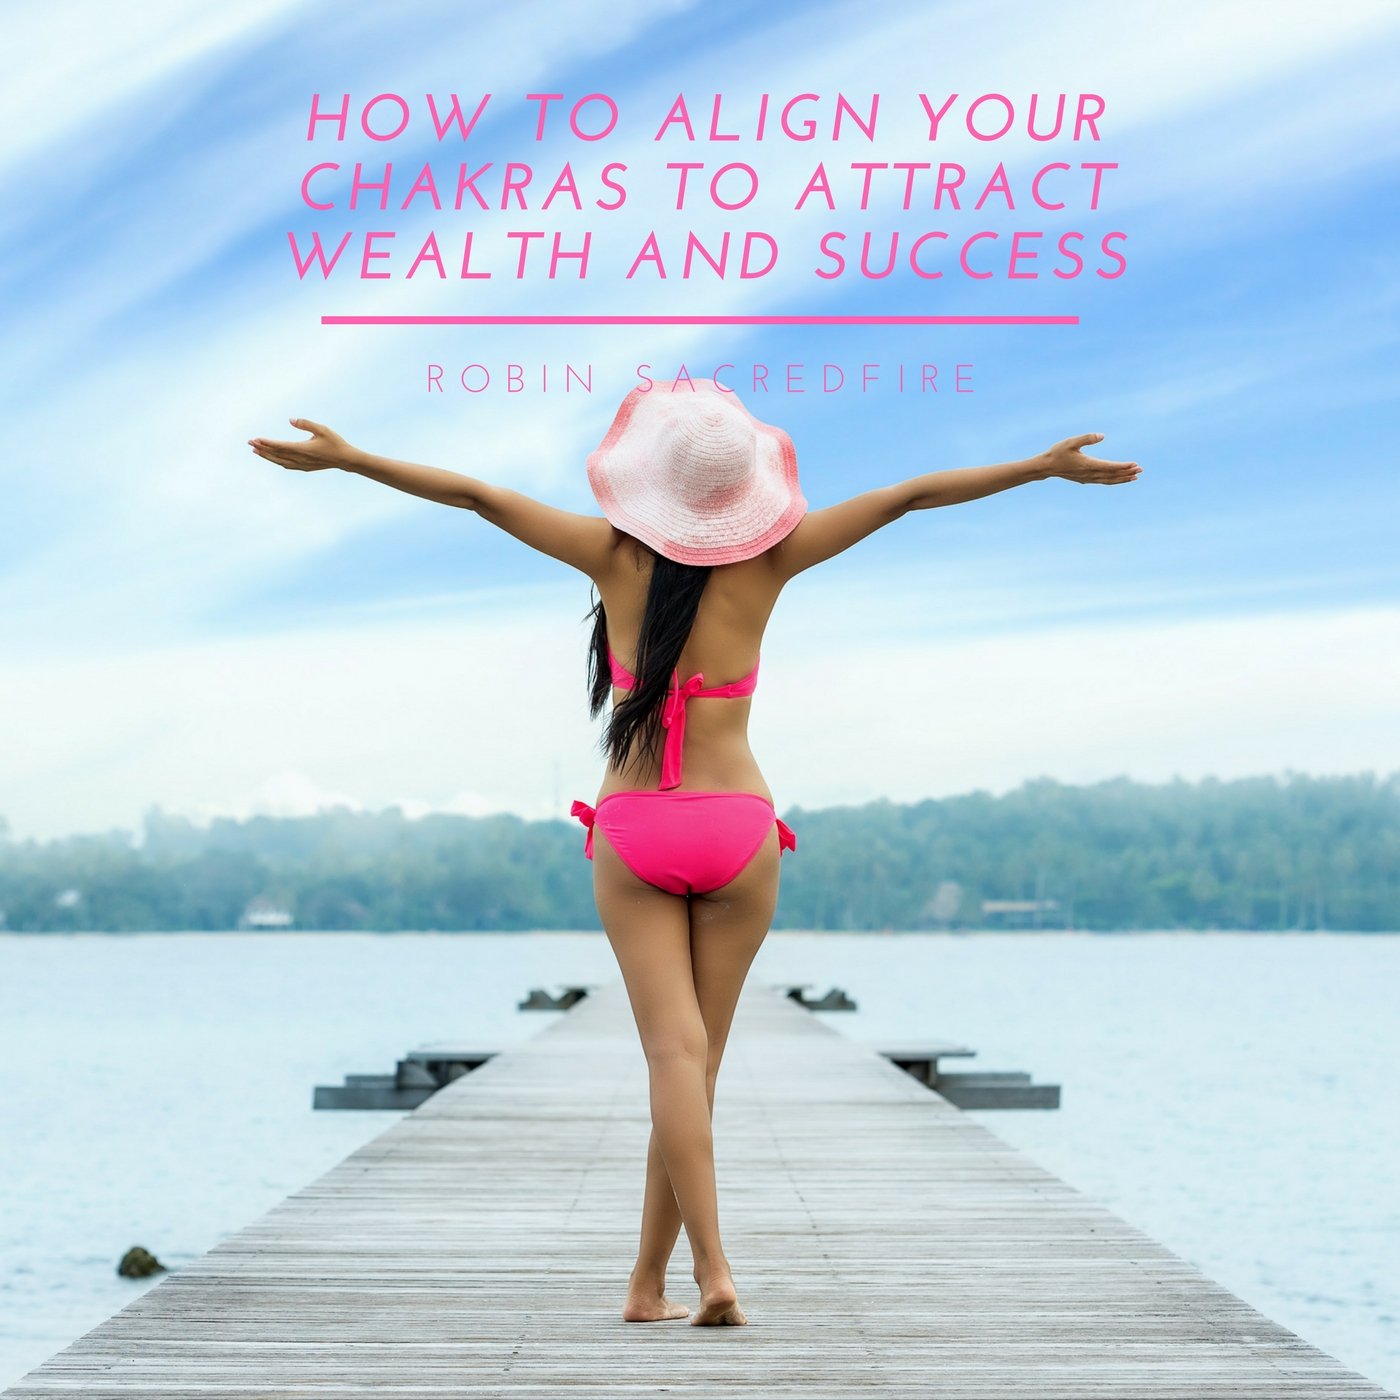 How to Align Your Chakras to Attract Wealth and Success (Audiobook)